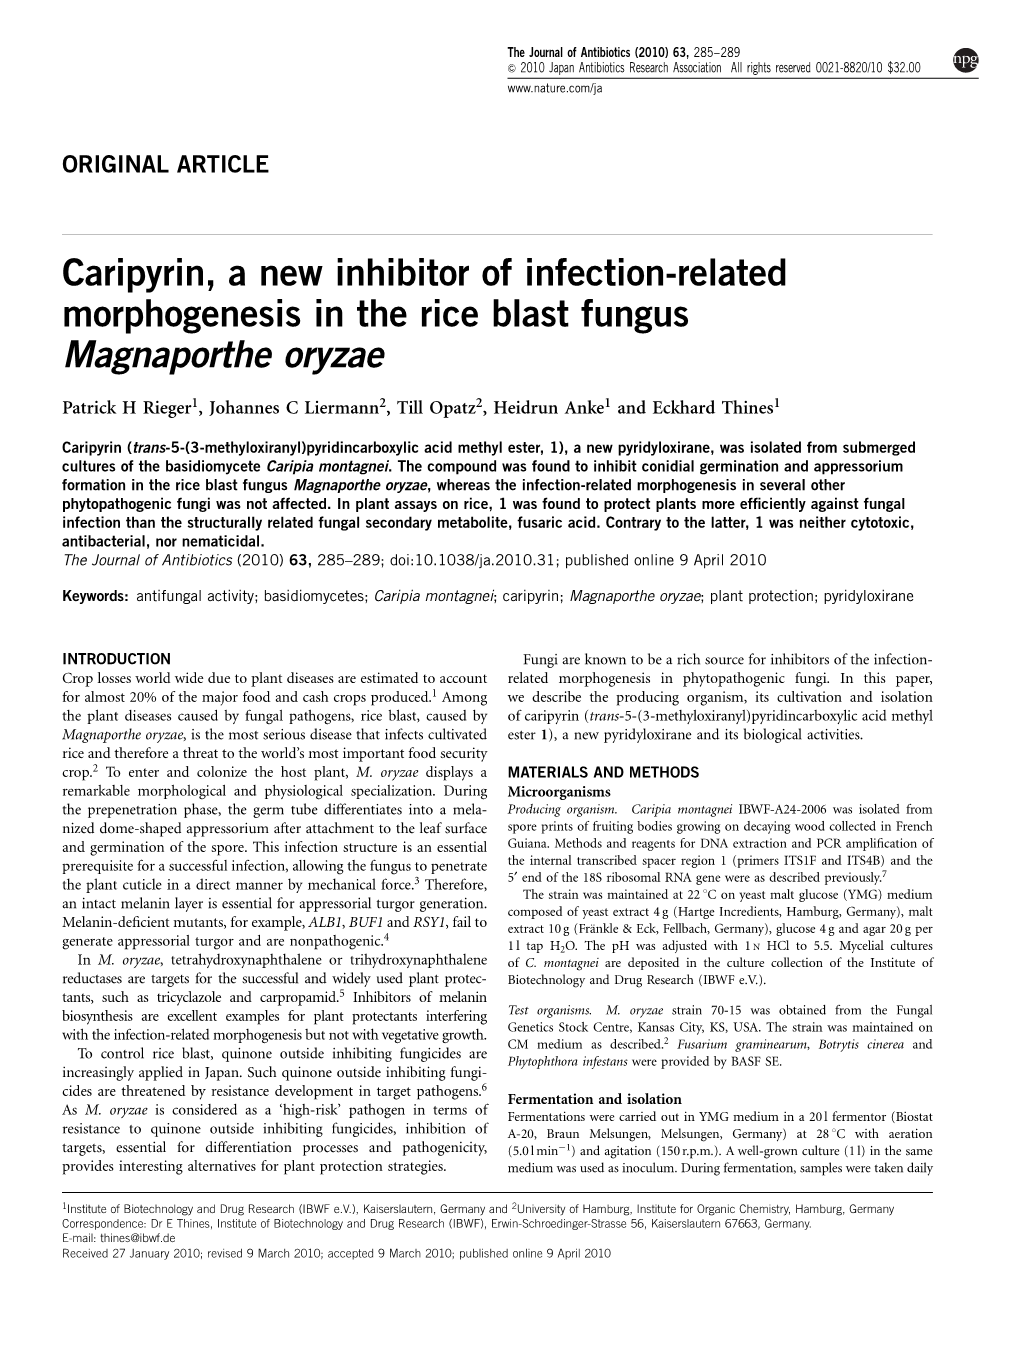 Caripyrin, a New Inhibitor of Infection-Related Morphogenesis in the Rice Blast Fungus Magnaporthe Oryzae